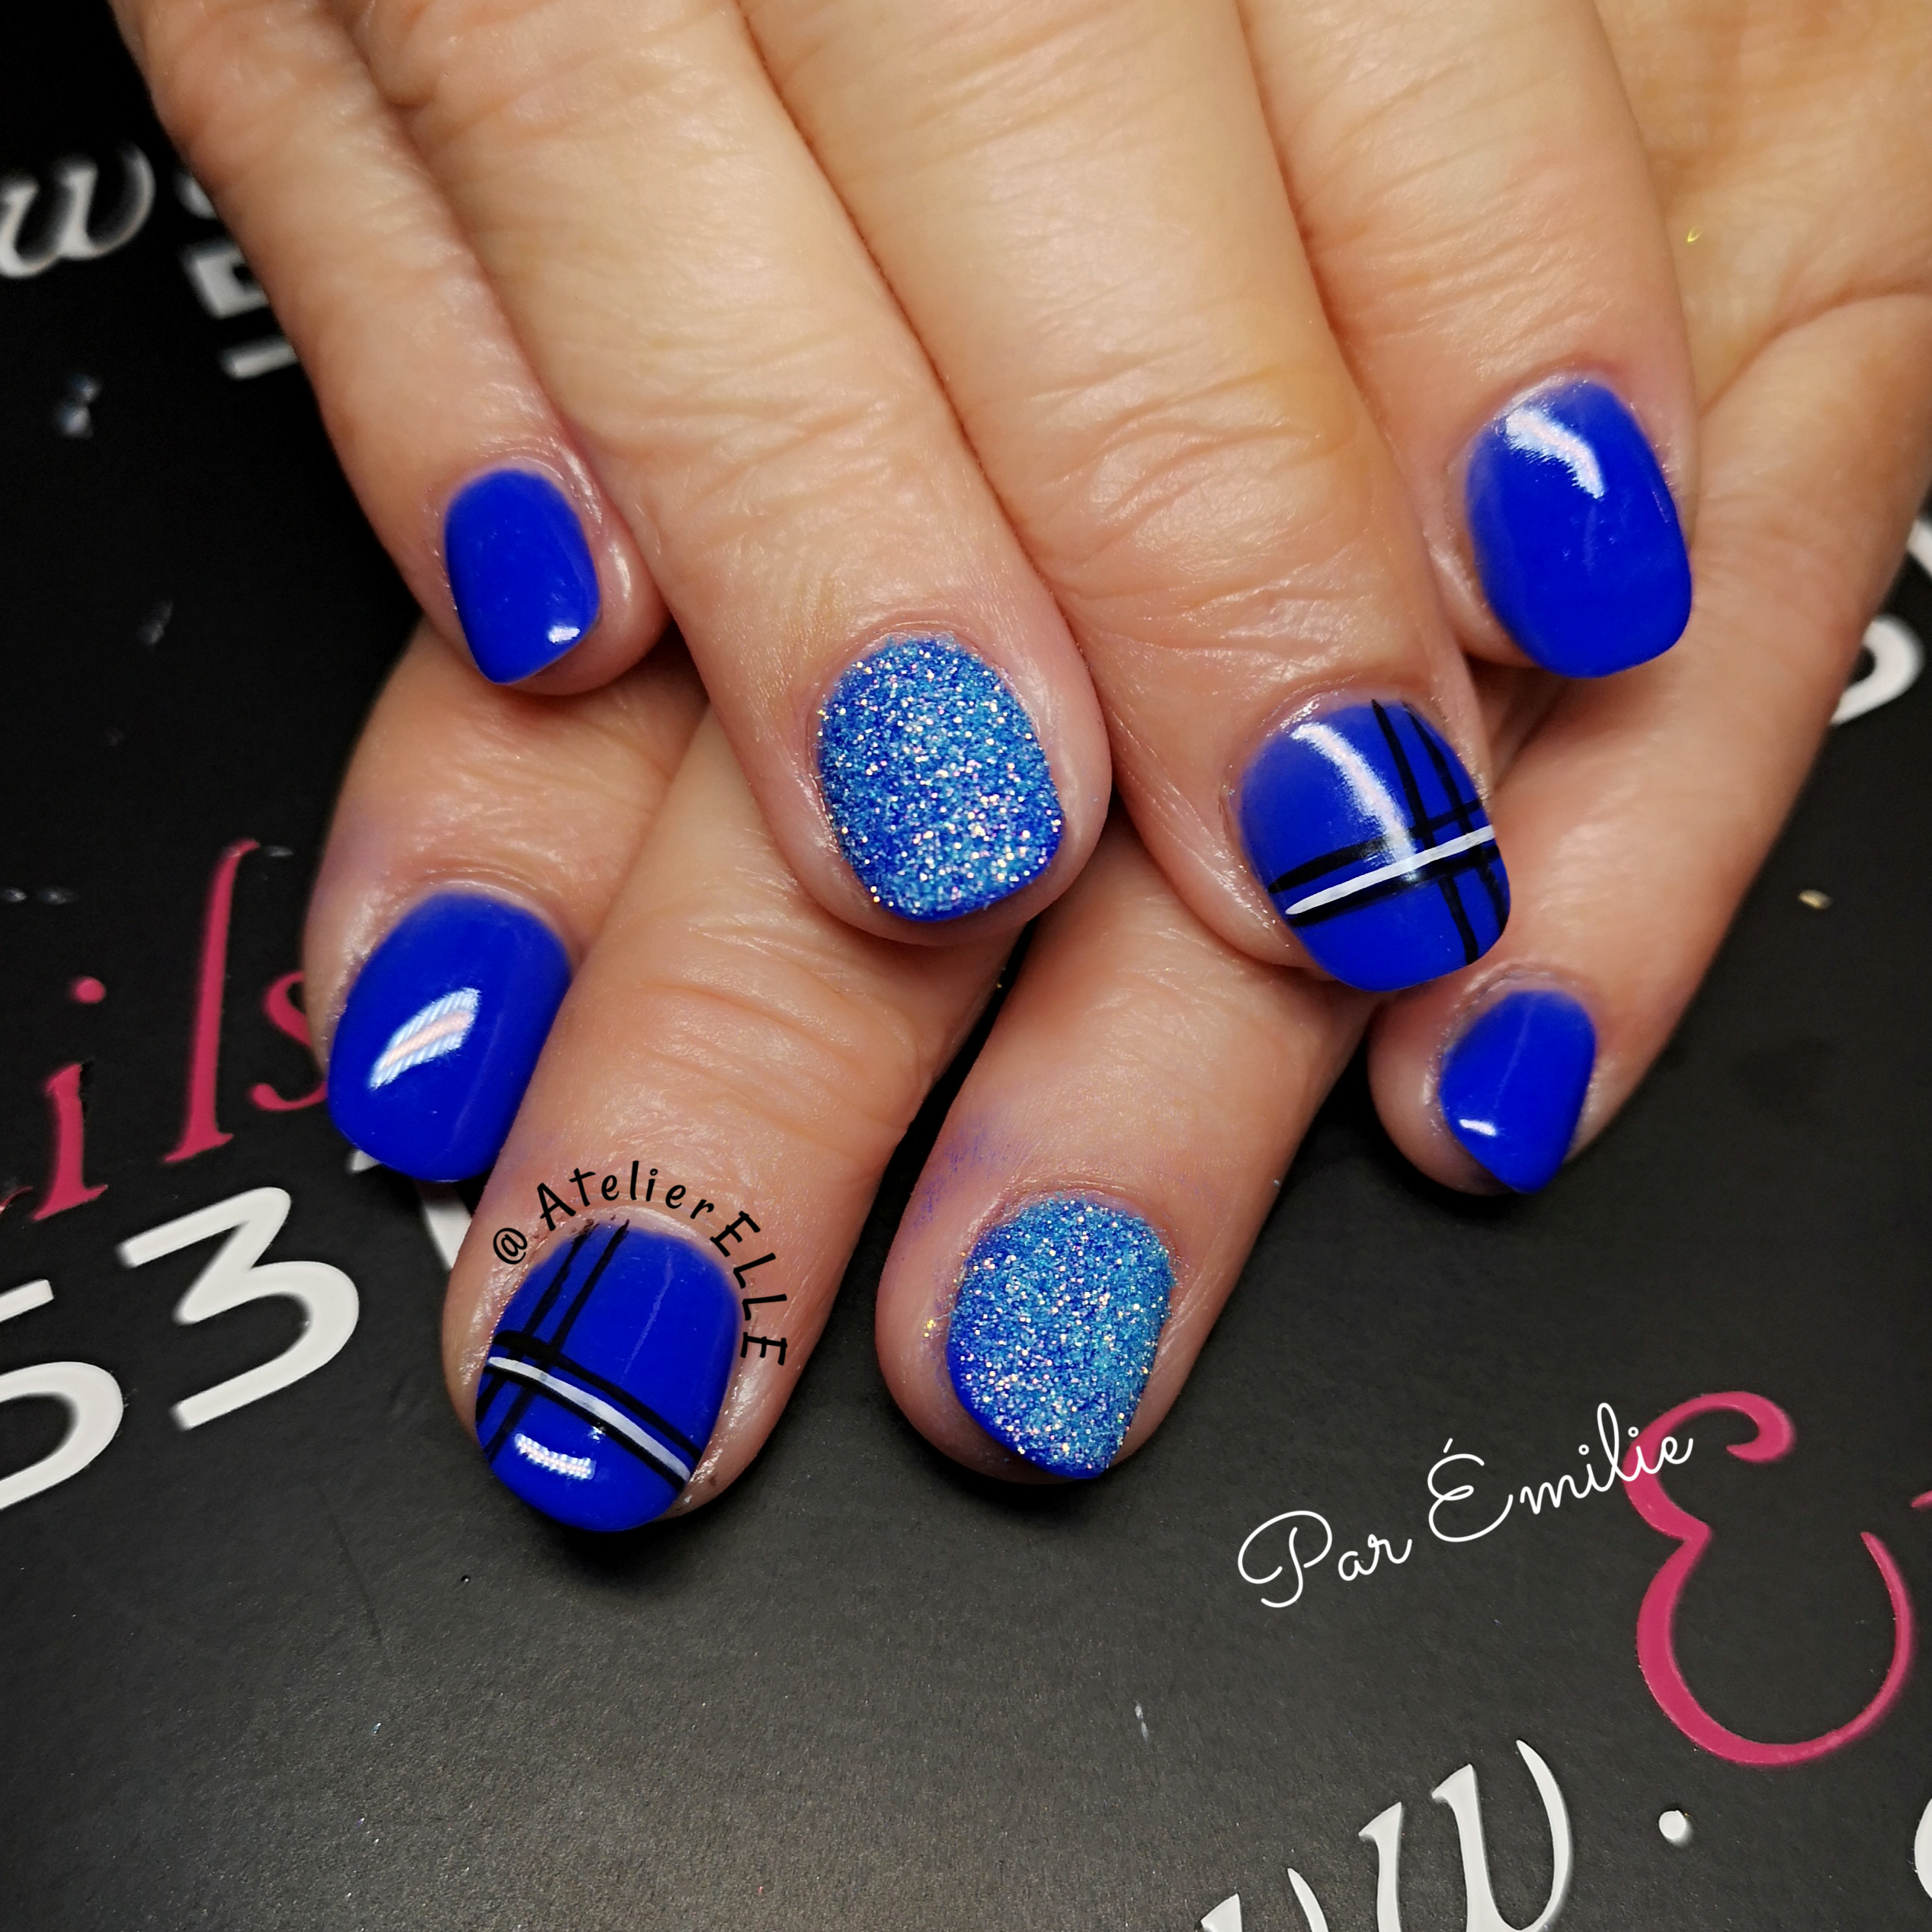 pose d'ongle resine et poudre turquoise